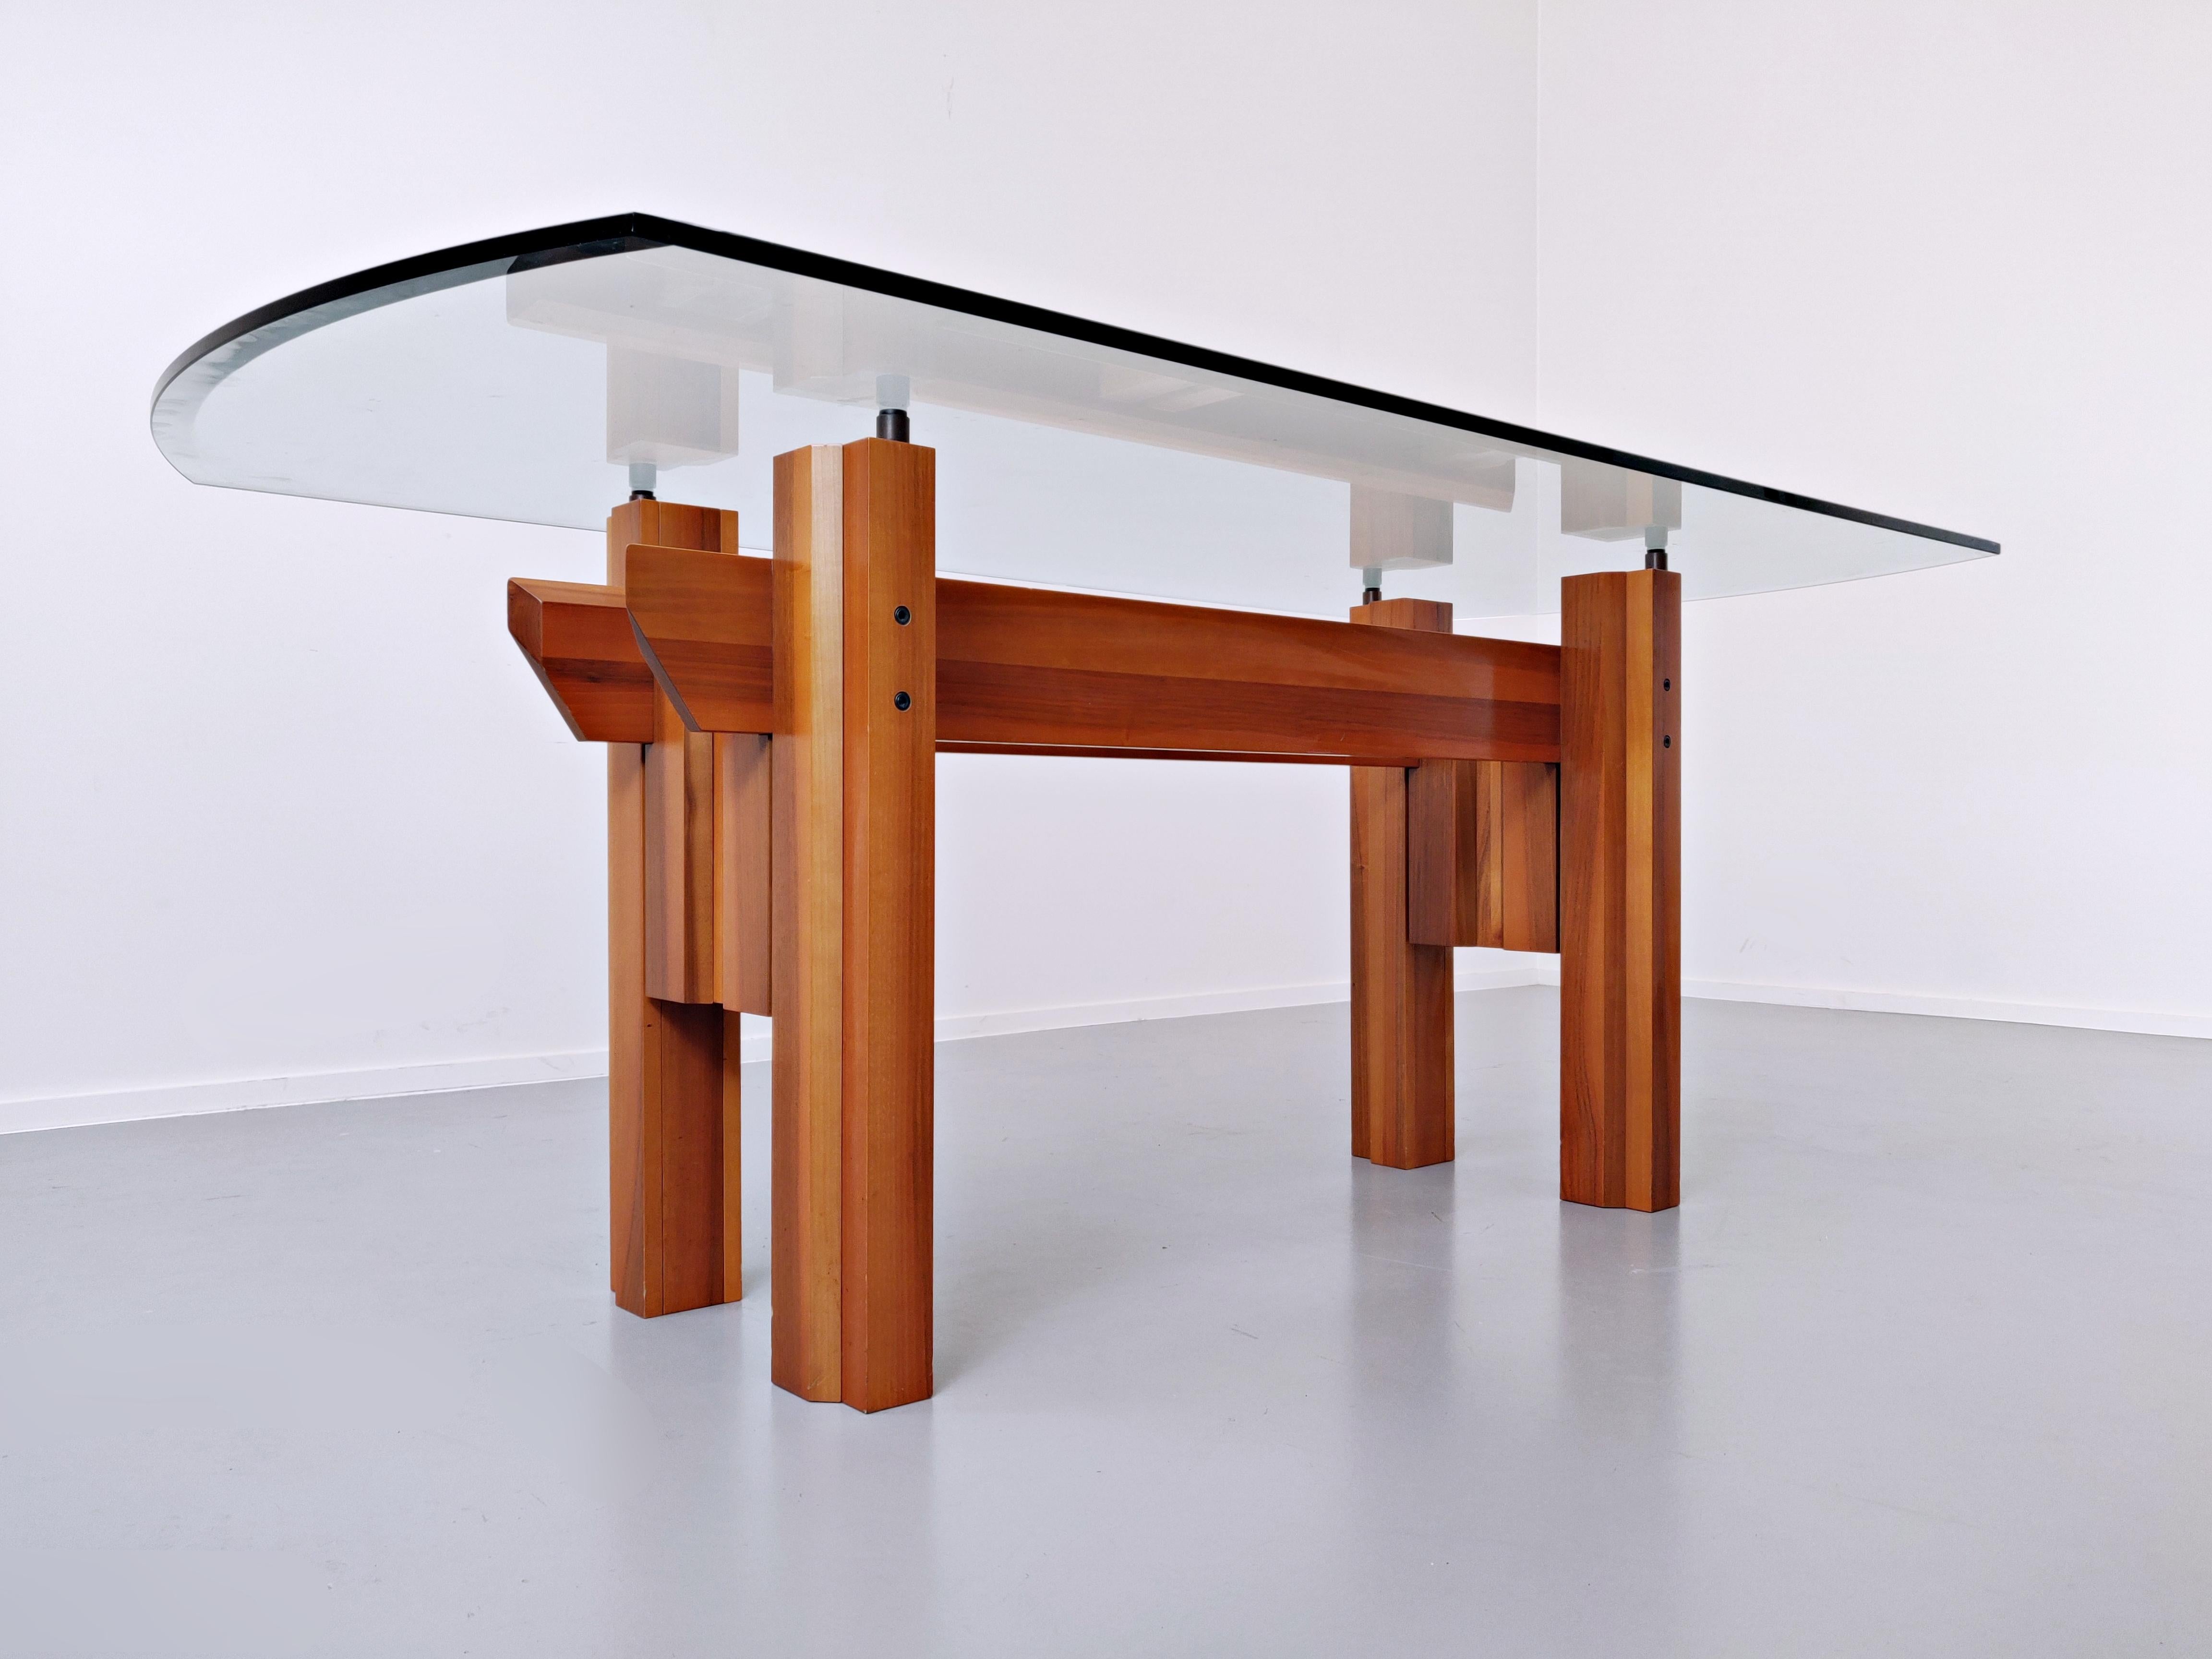 Italian Dining Table, Wood And Glass Top By Franco Poli For Bernini C. 1979 For Sale 1